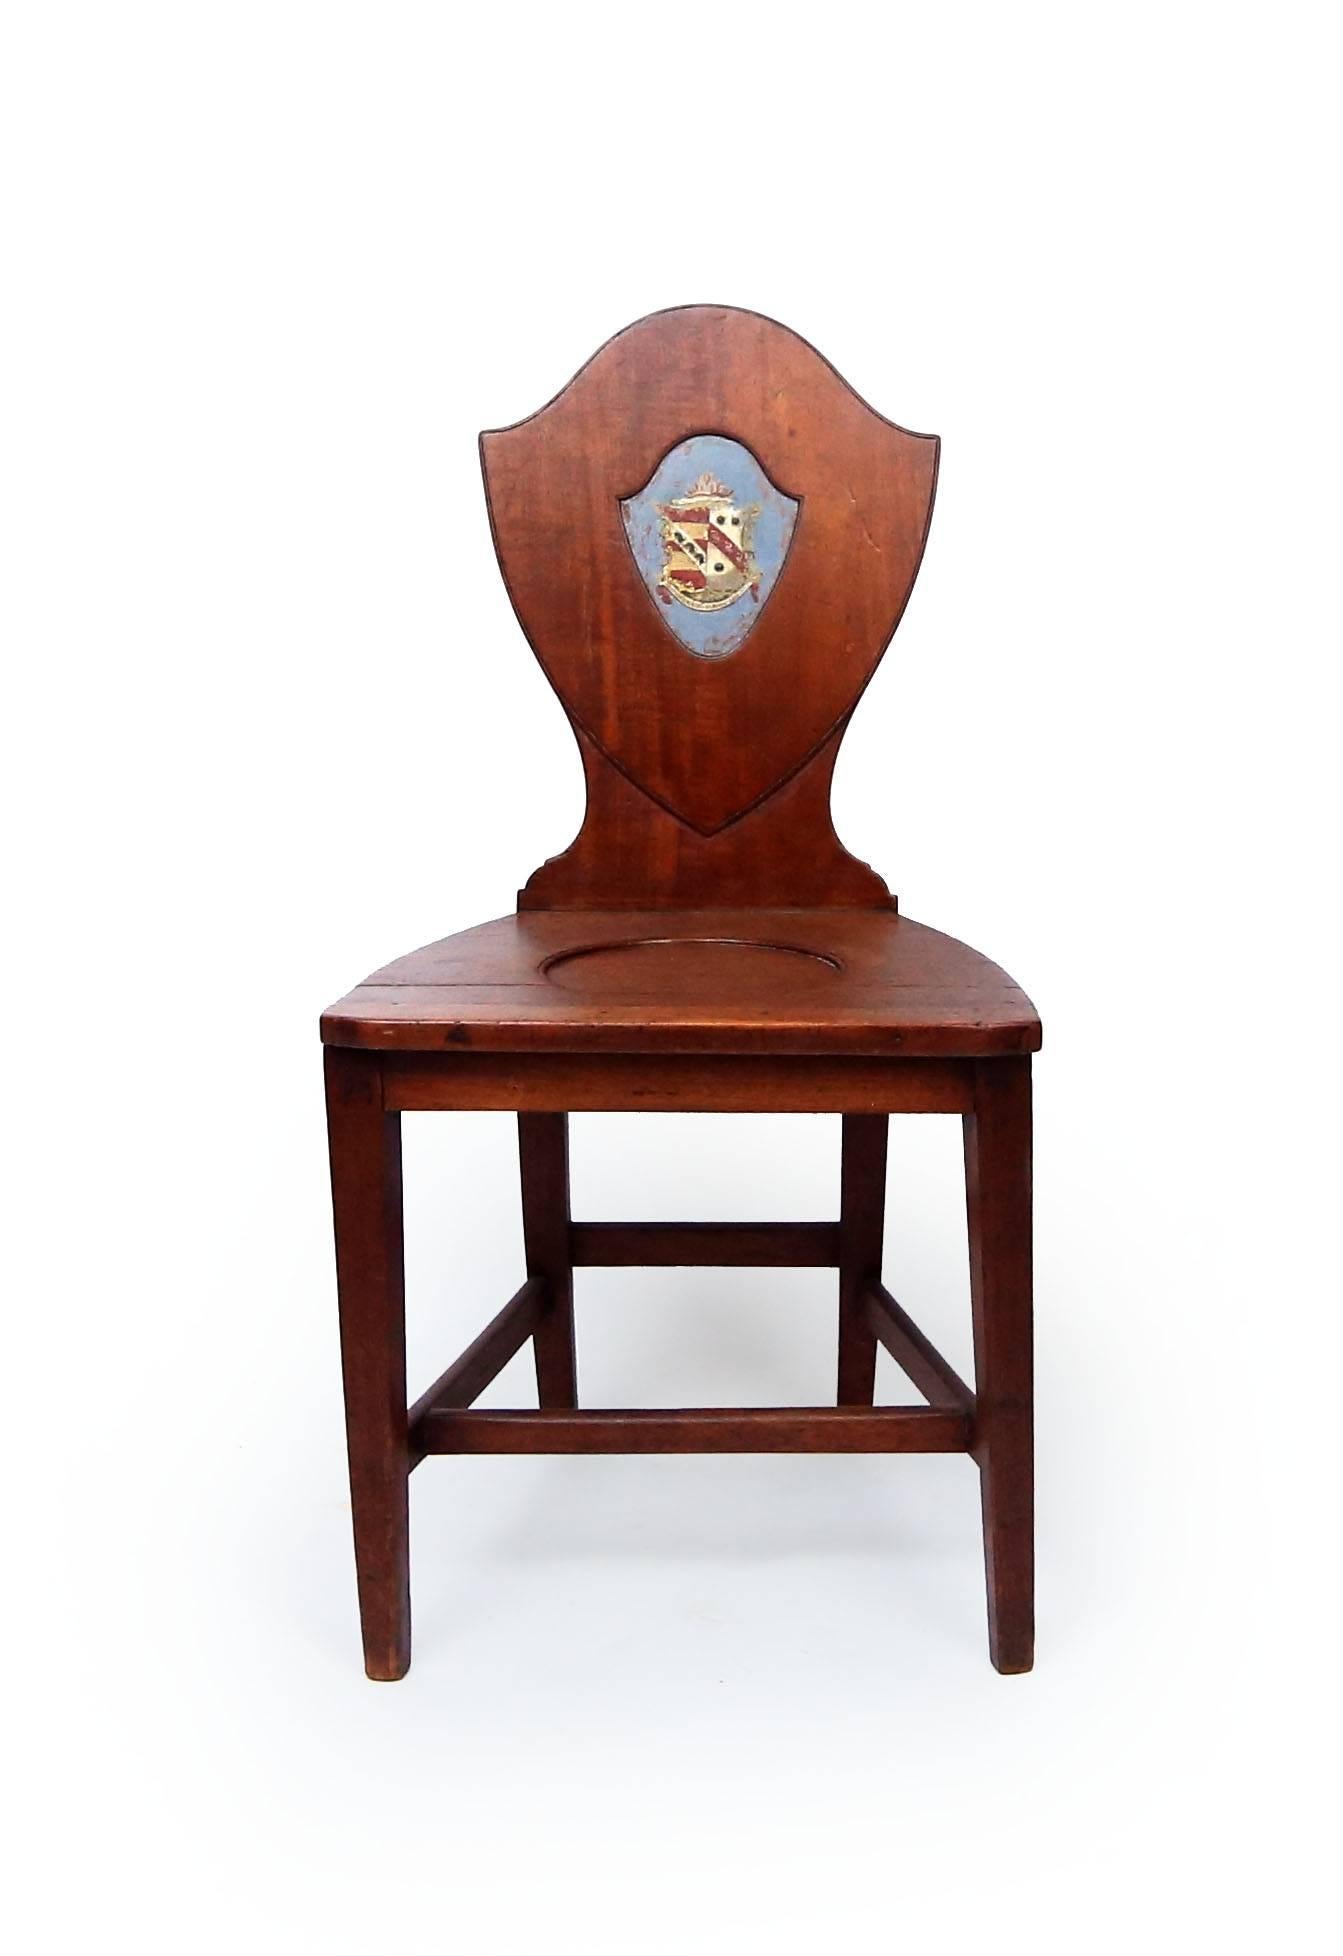 Fine George III mahogany hall chair, the shield back bear painted heraldic crests commemorating the union of the original owners: one half lions rampant and the other swans. The banner below reads 